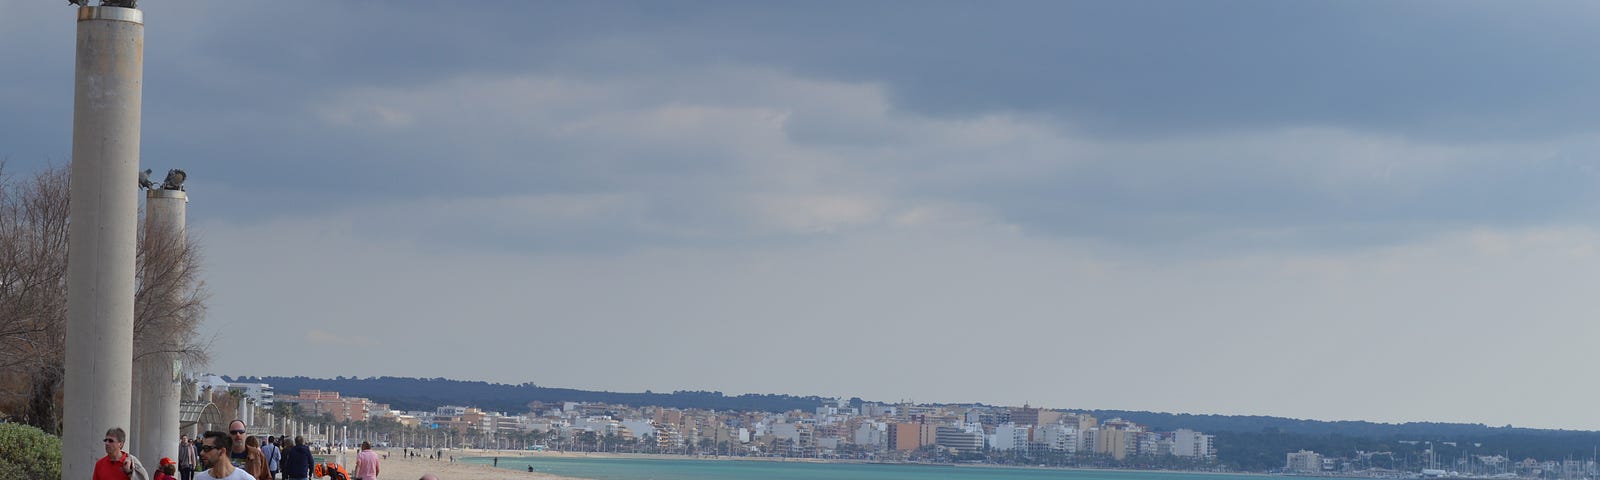 Some people walking on a beach promenade by the sea and some buildings and monuments can be seen in the distance.